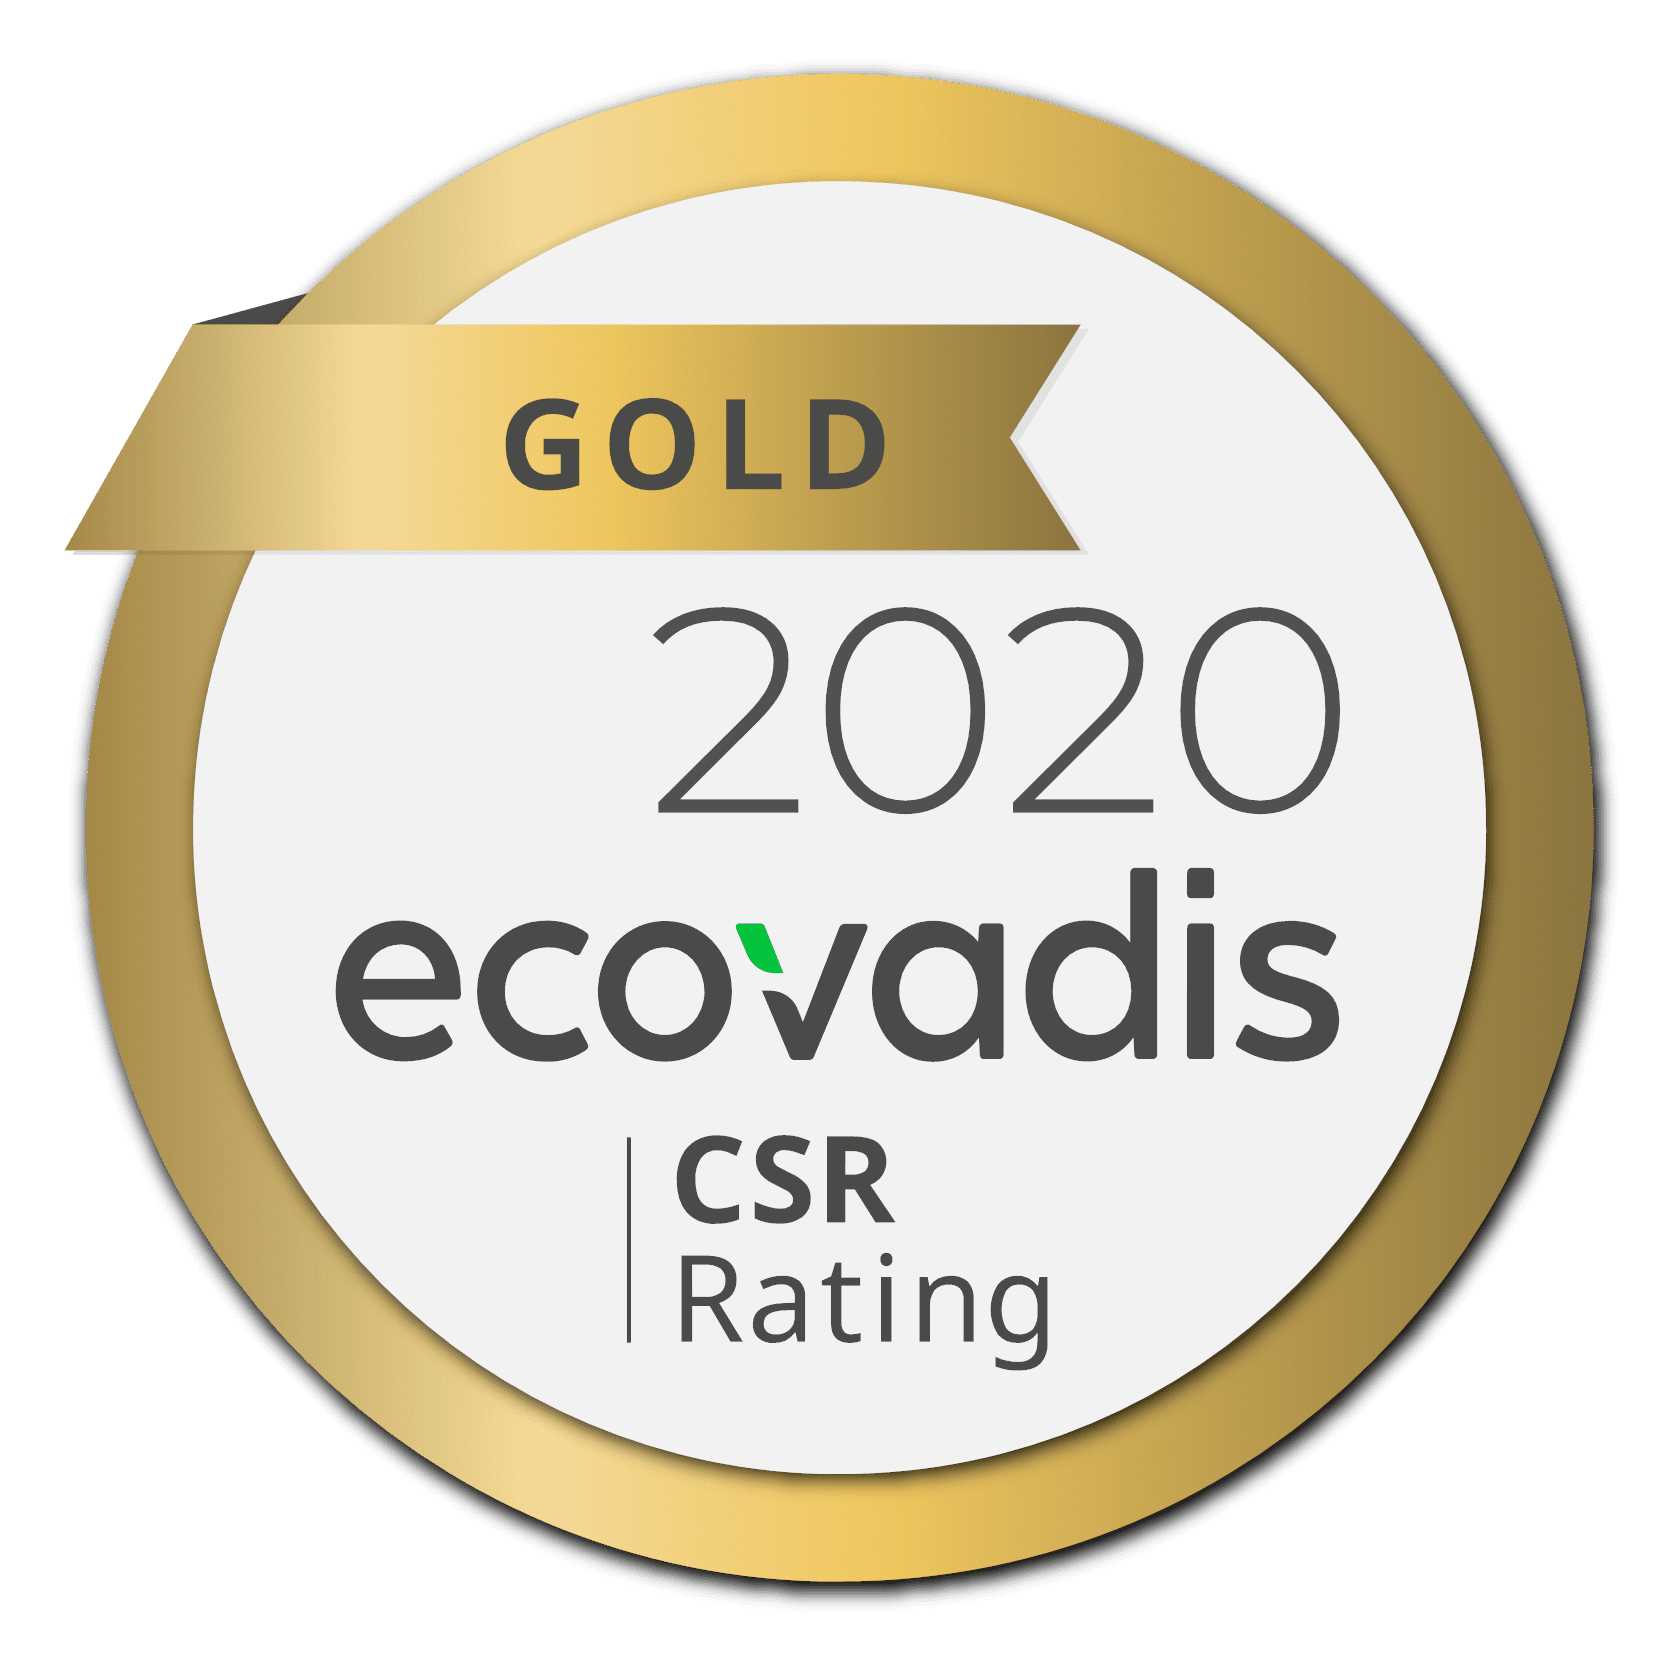 Konica Minolta earns GOLD Level Recognition Medal